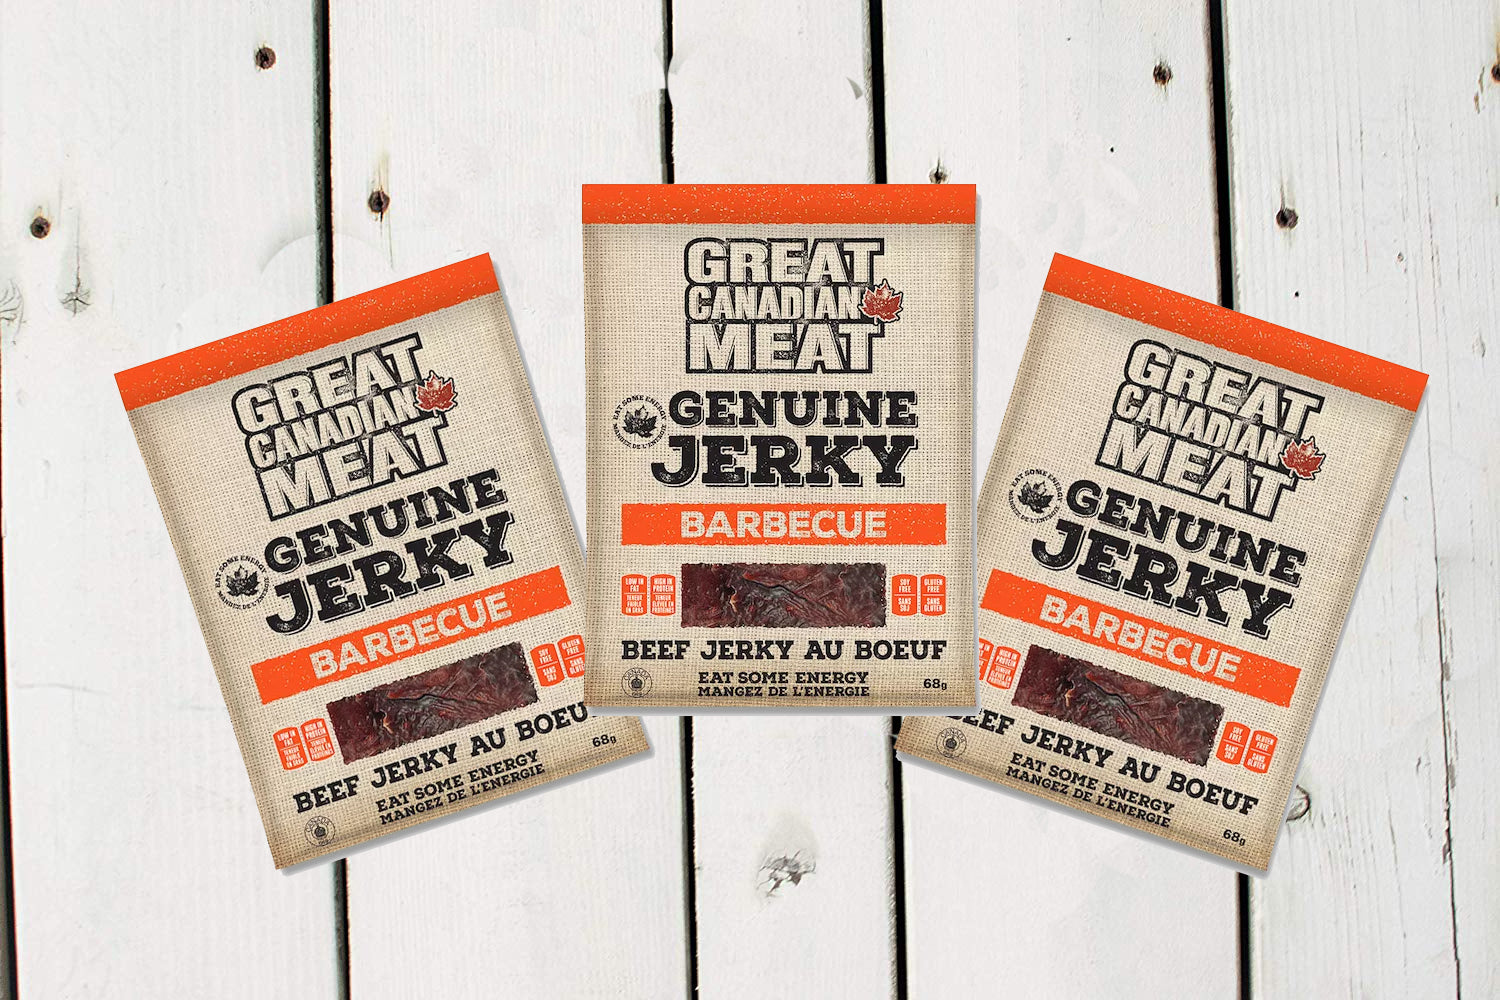 Barbecue Beef Jerky (Great Canadian Meat)_5_cc